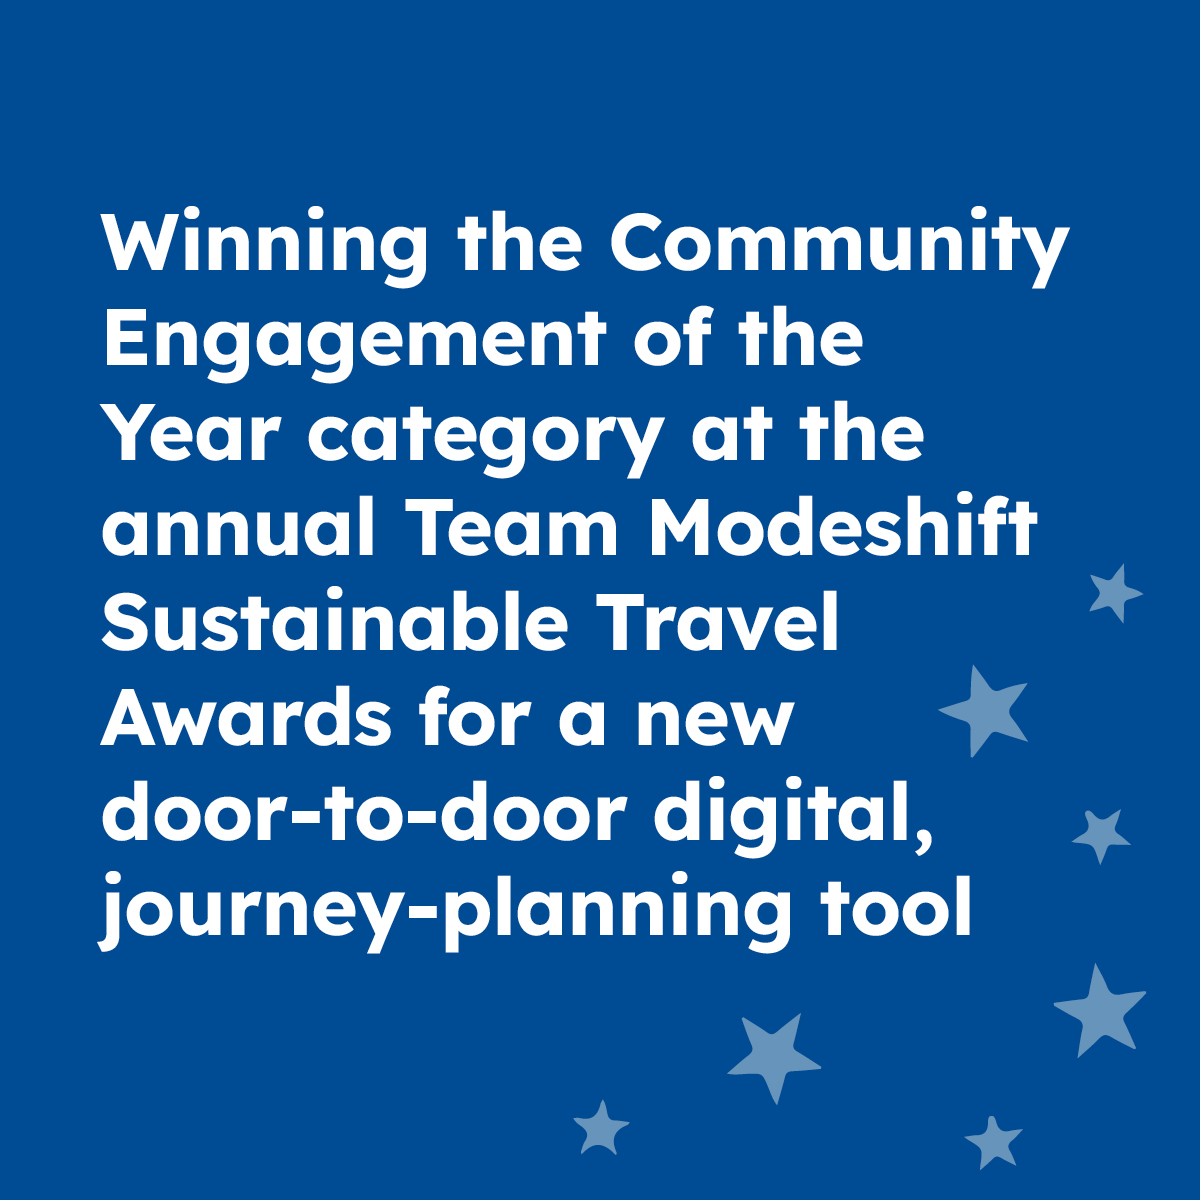 Winning the Community Engagement of the Year category at the annual Team Modeshift Sustainable Travel Awards for a new door-to-door digital, journey-planning tool